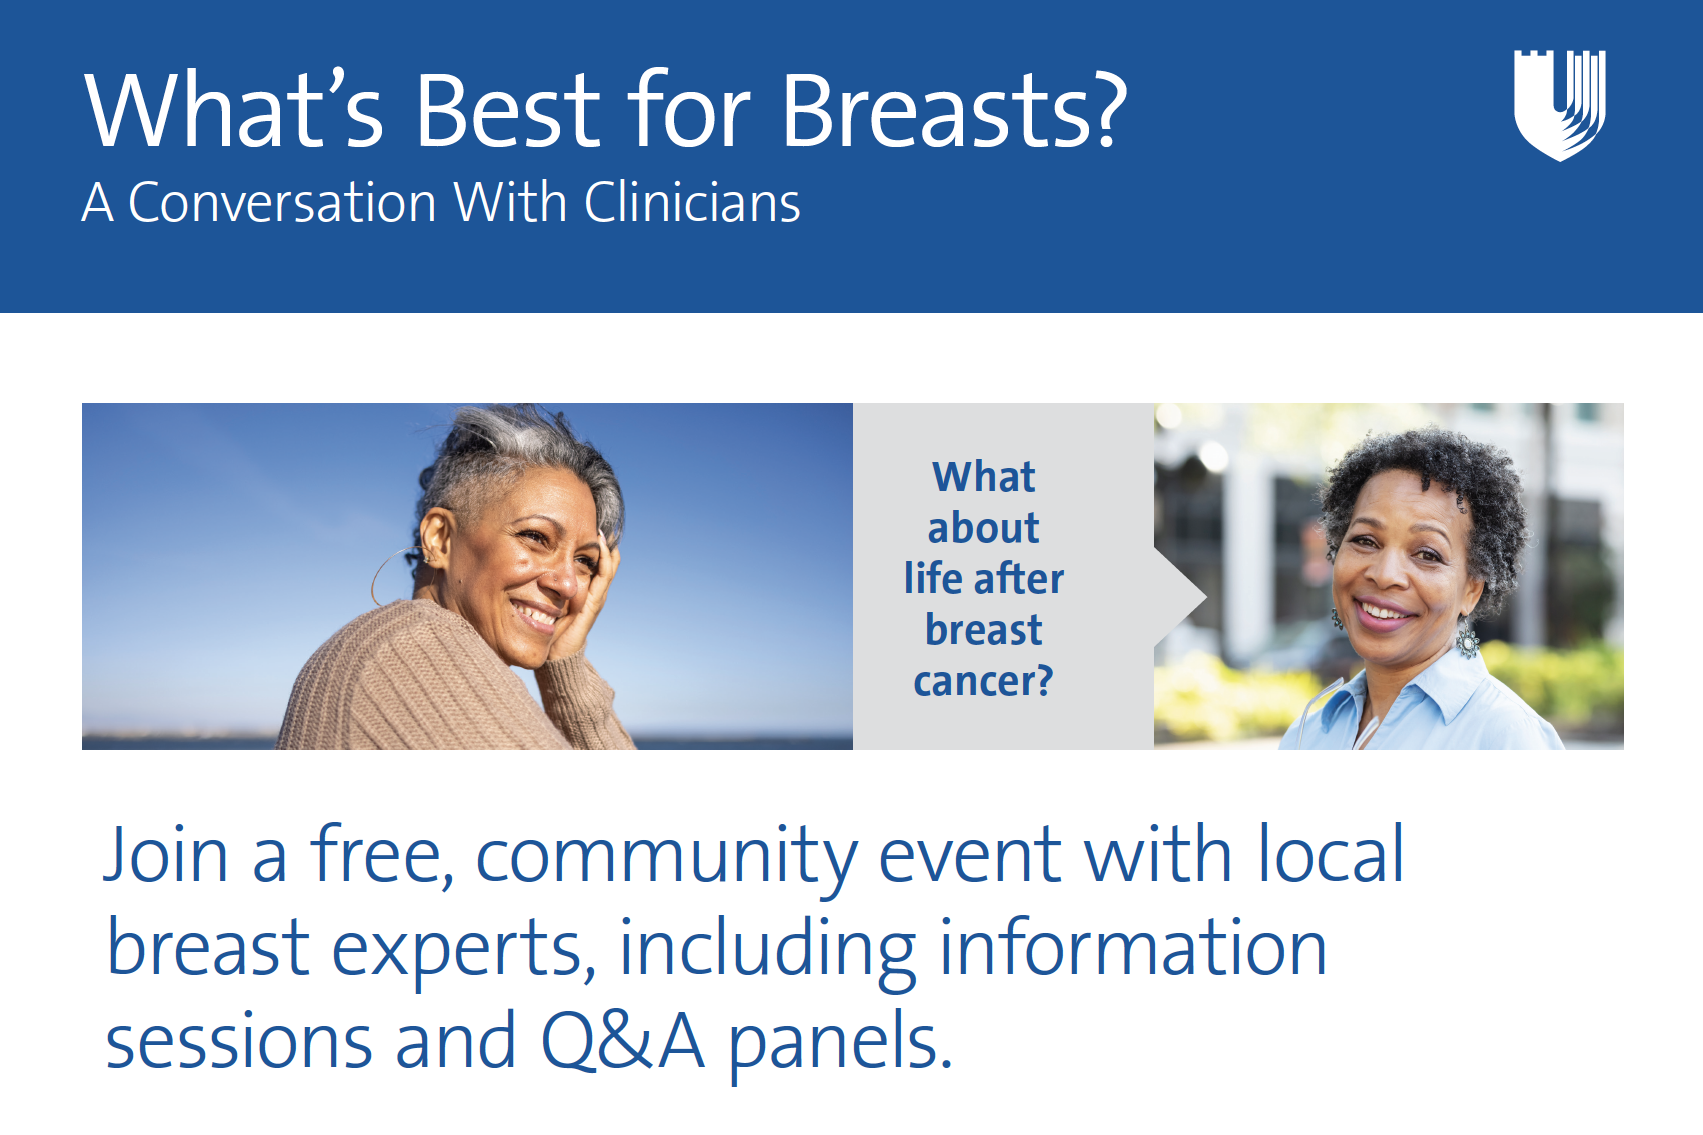 What's Best For Breasts? A Conversation with Clinicians